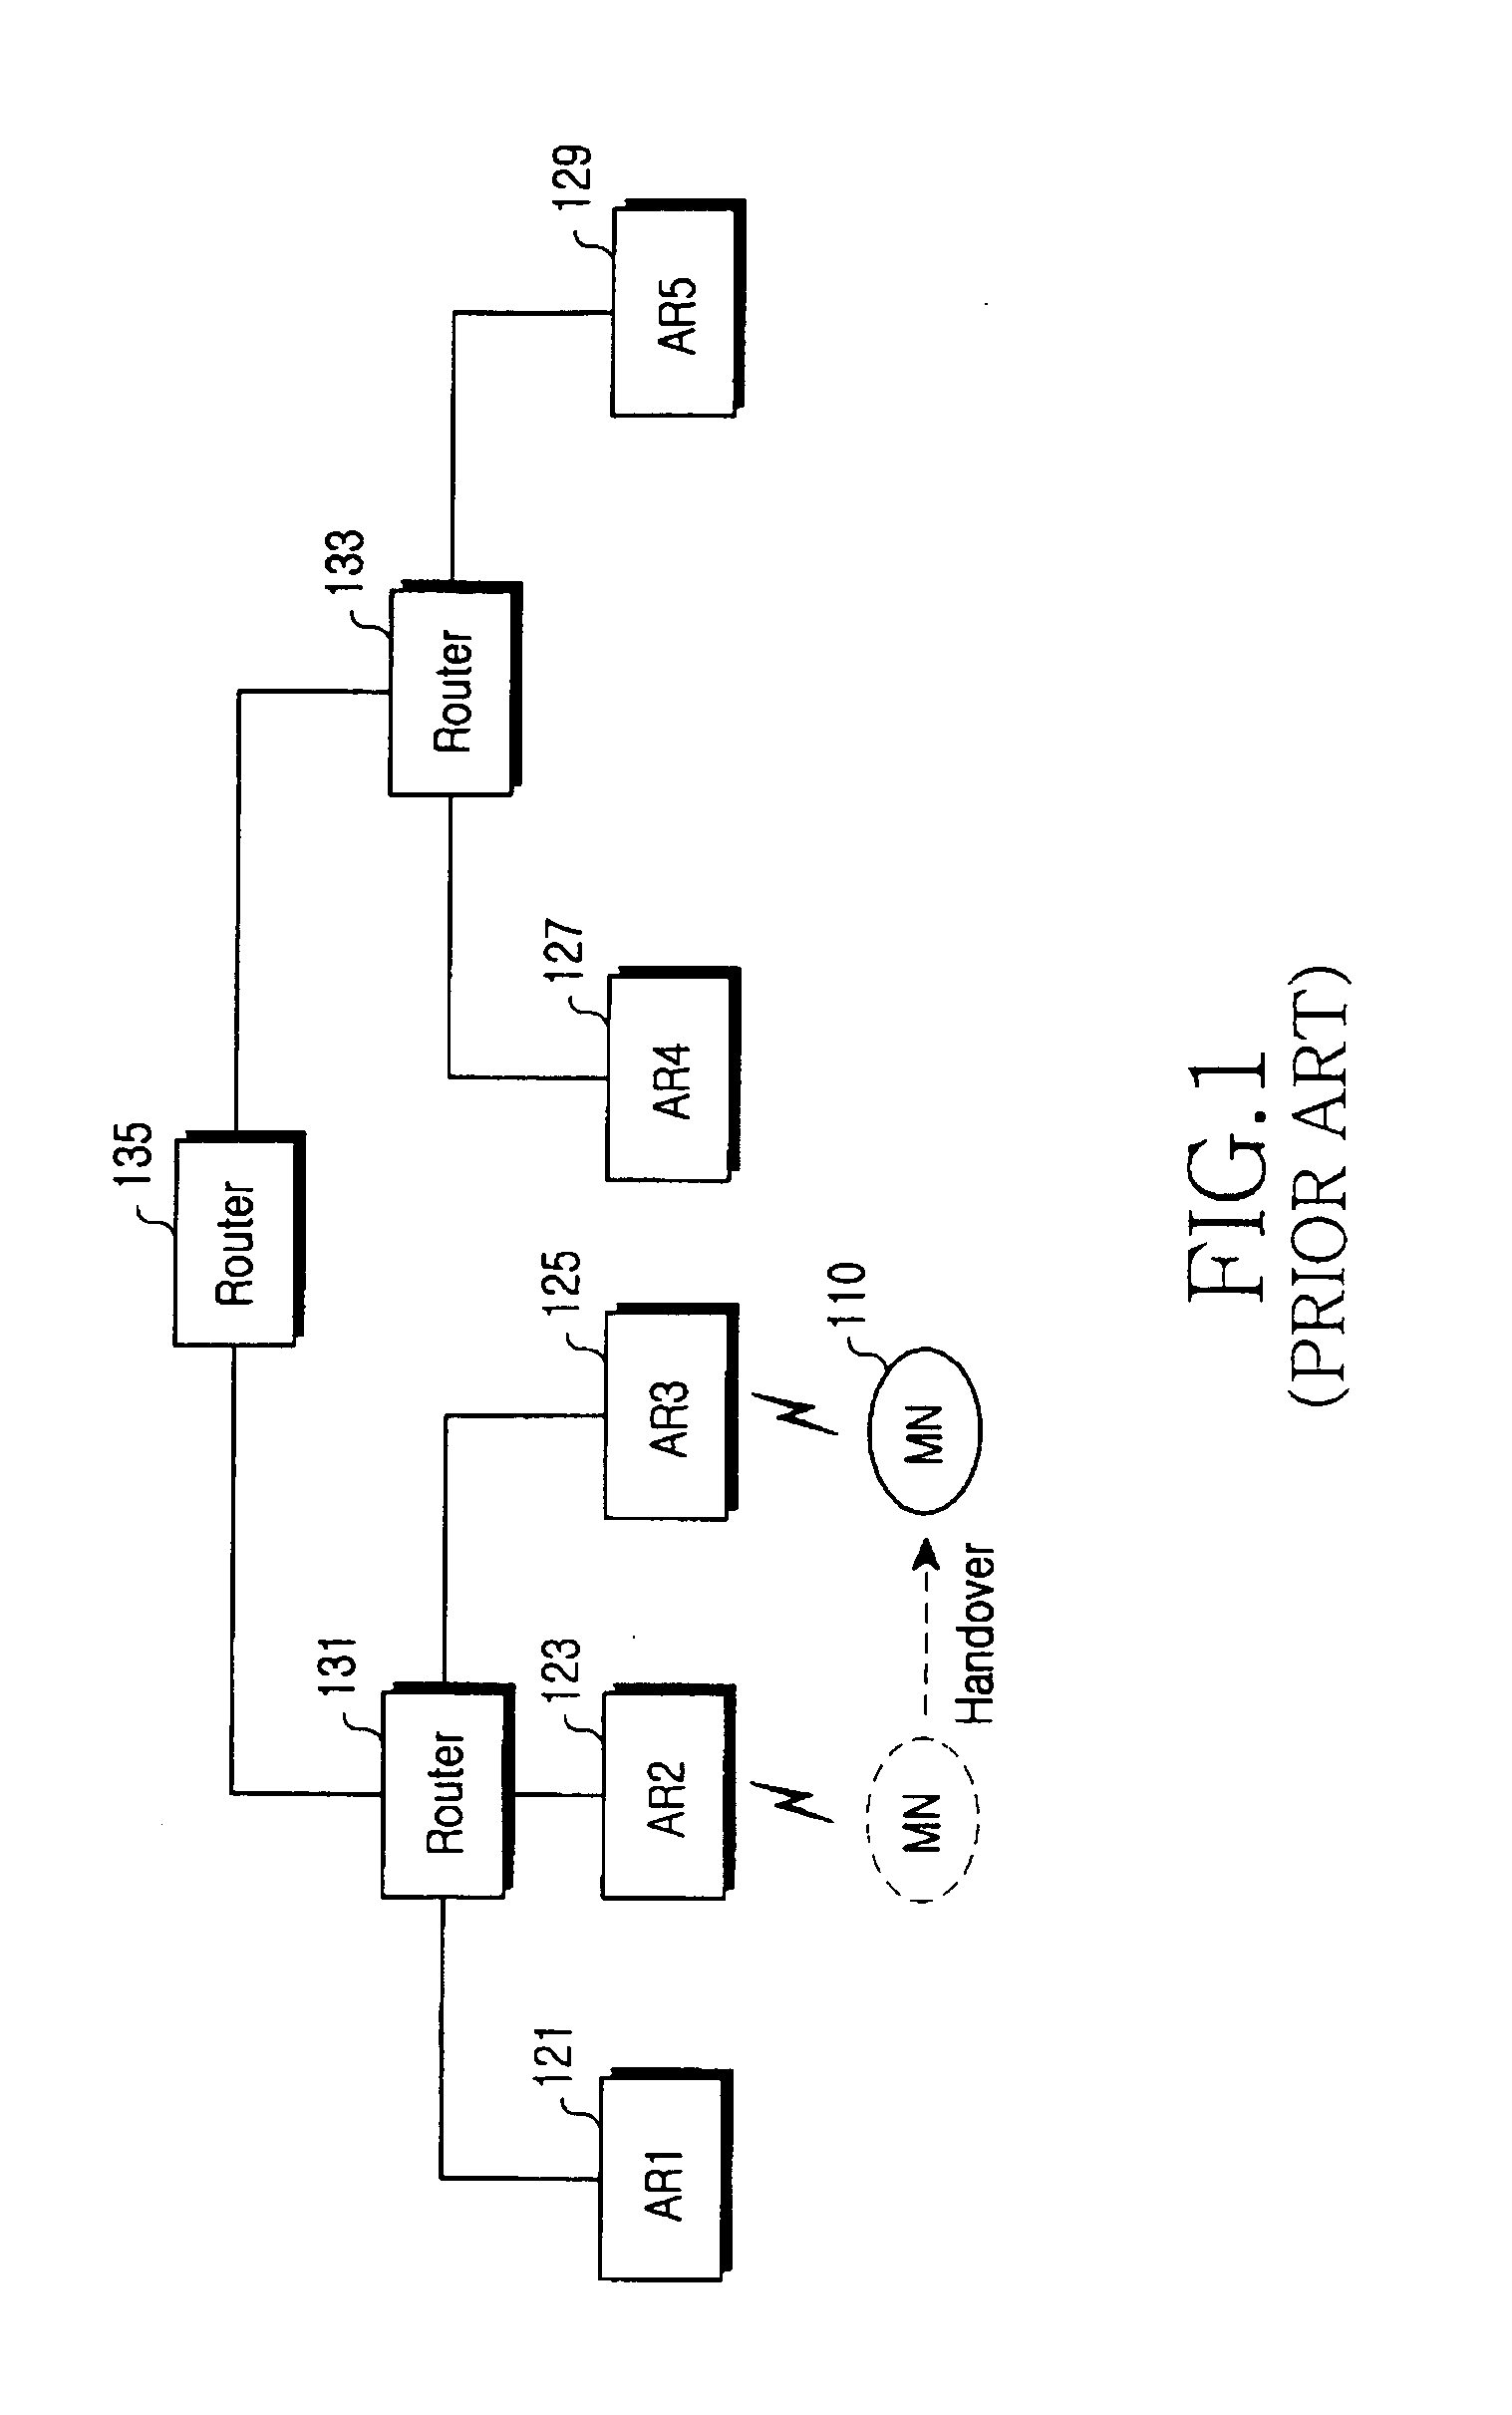 System and method for handover in a wireless communication system